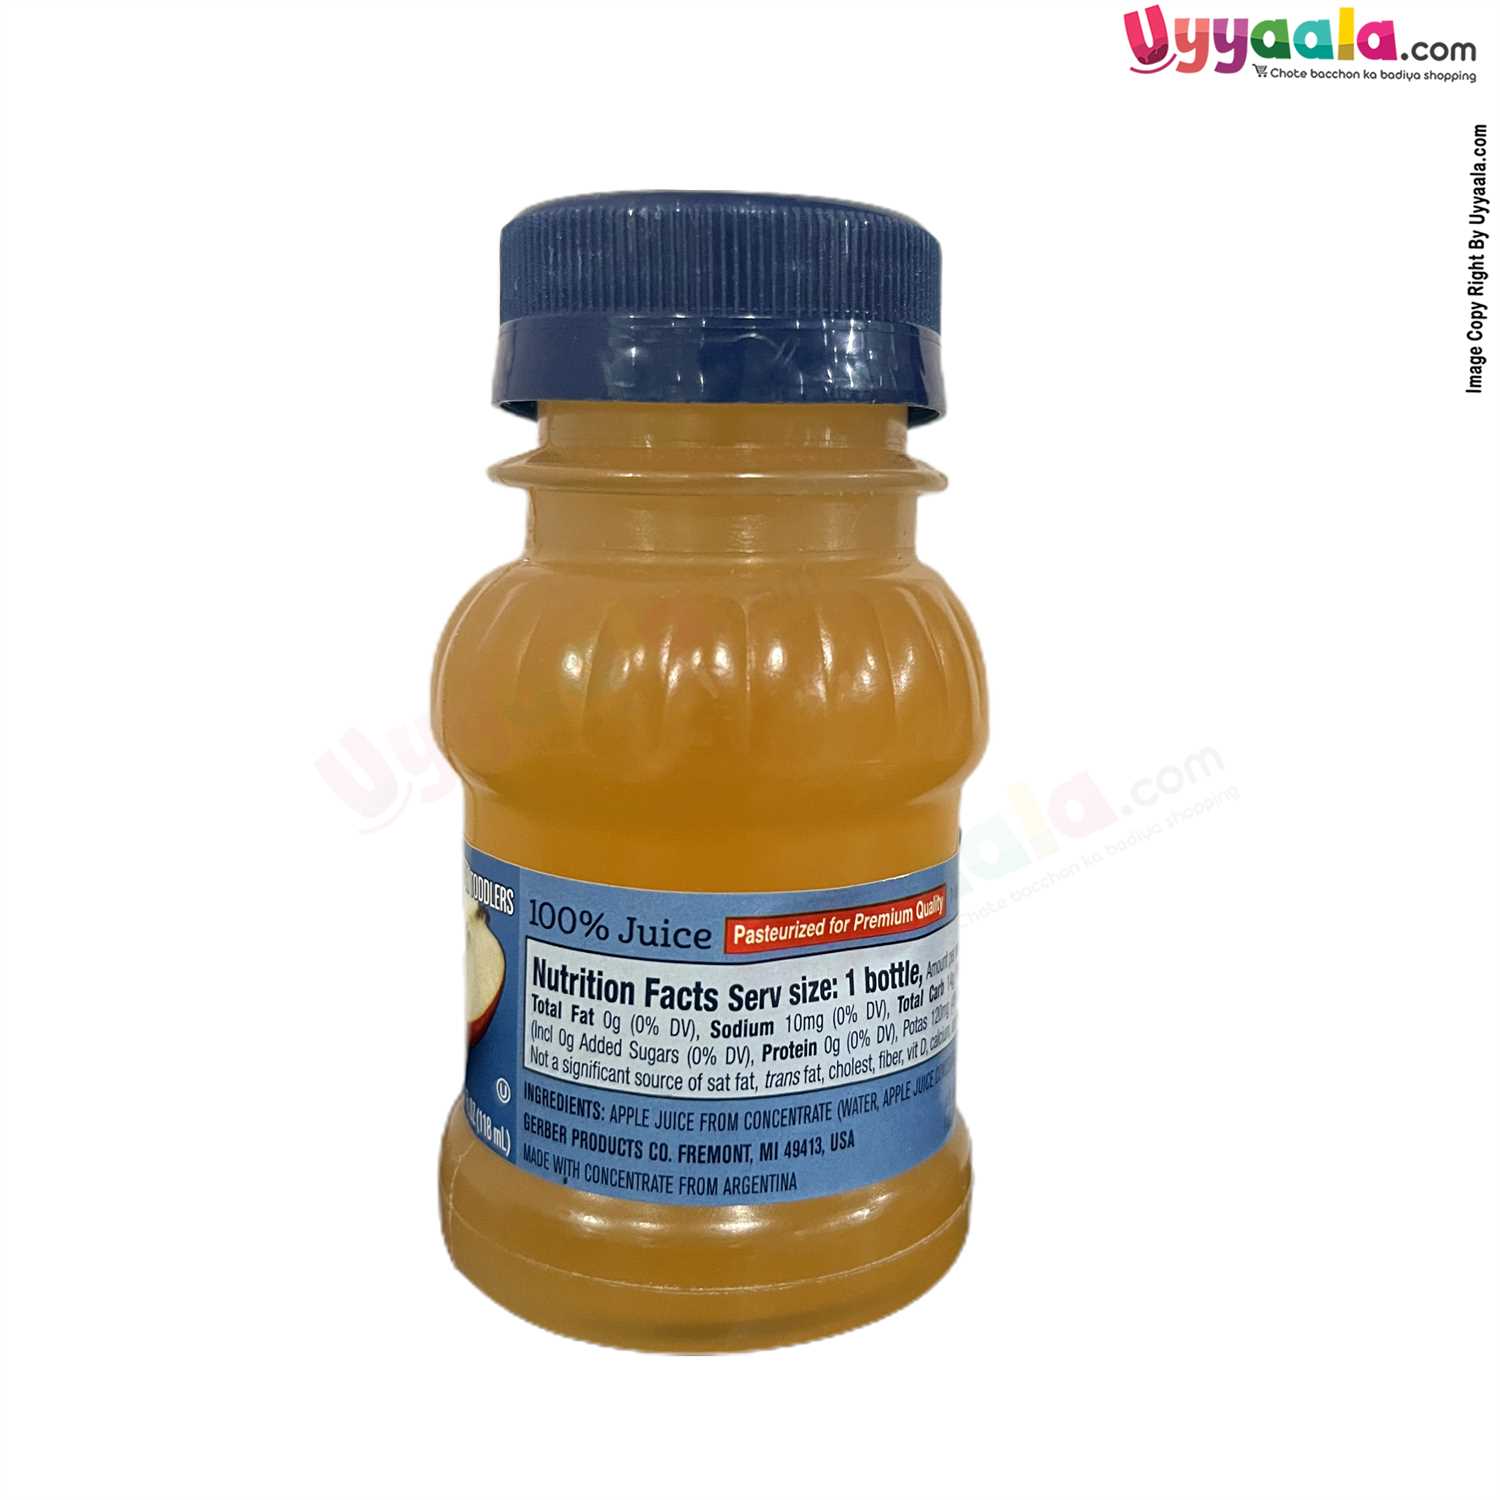 Buy Gerber Apple Concentrate Fruit Pulp Juice for your Baby - 118ml Online in India at uyyaala.com